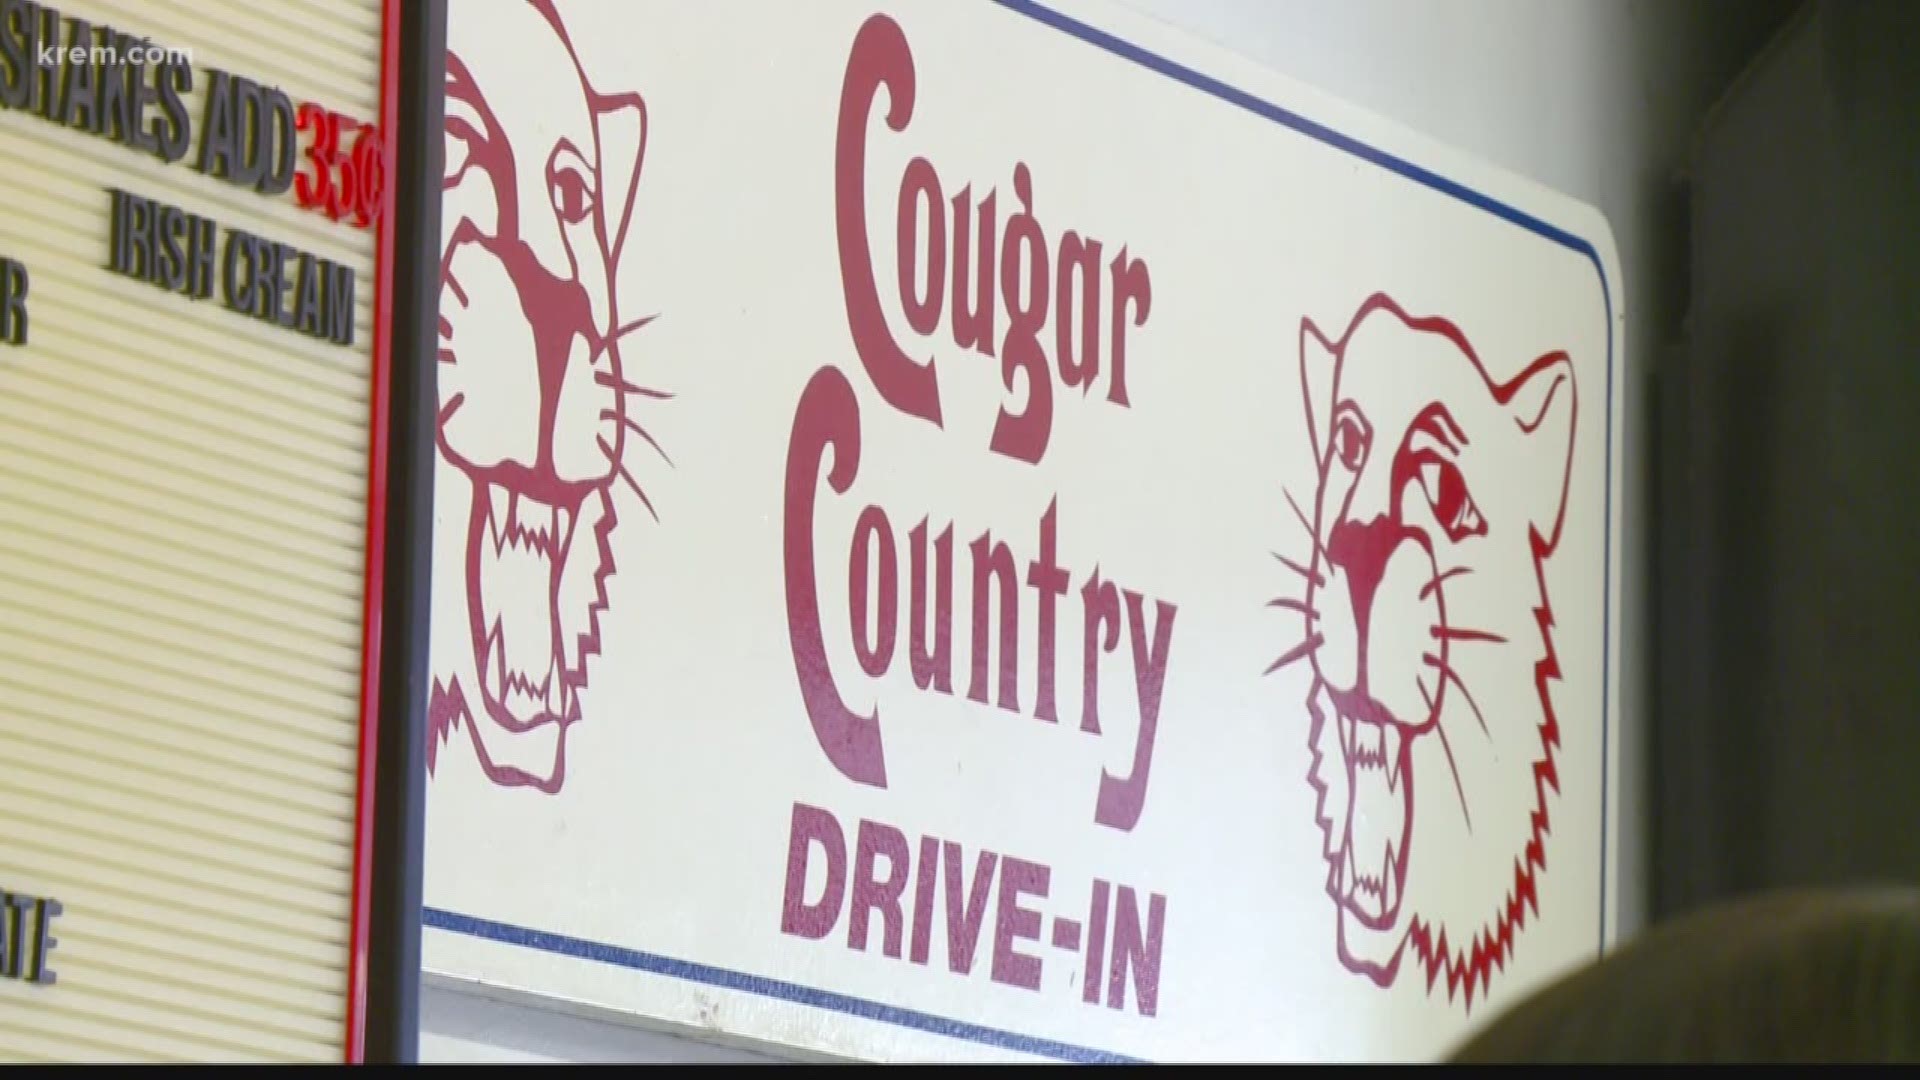 Cougar Country Drive-in needs full staff before grand opening